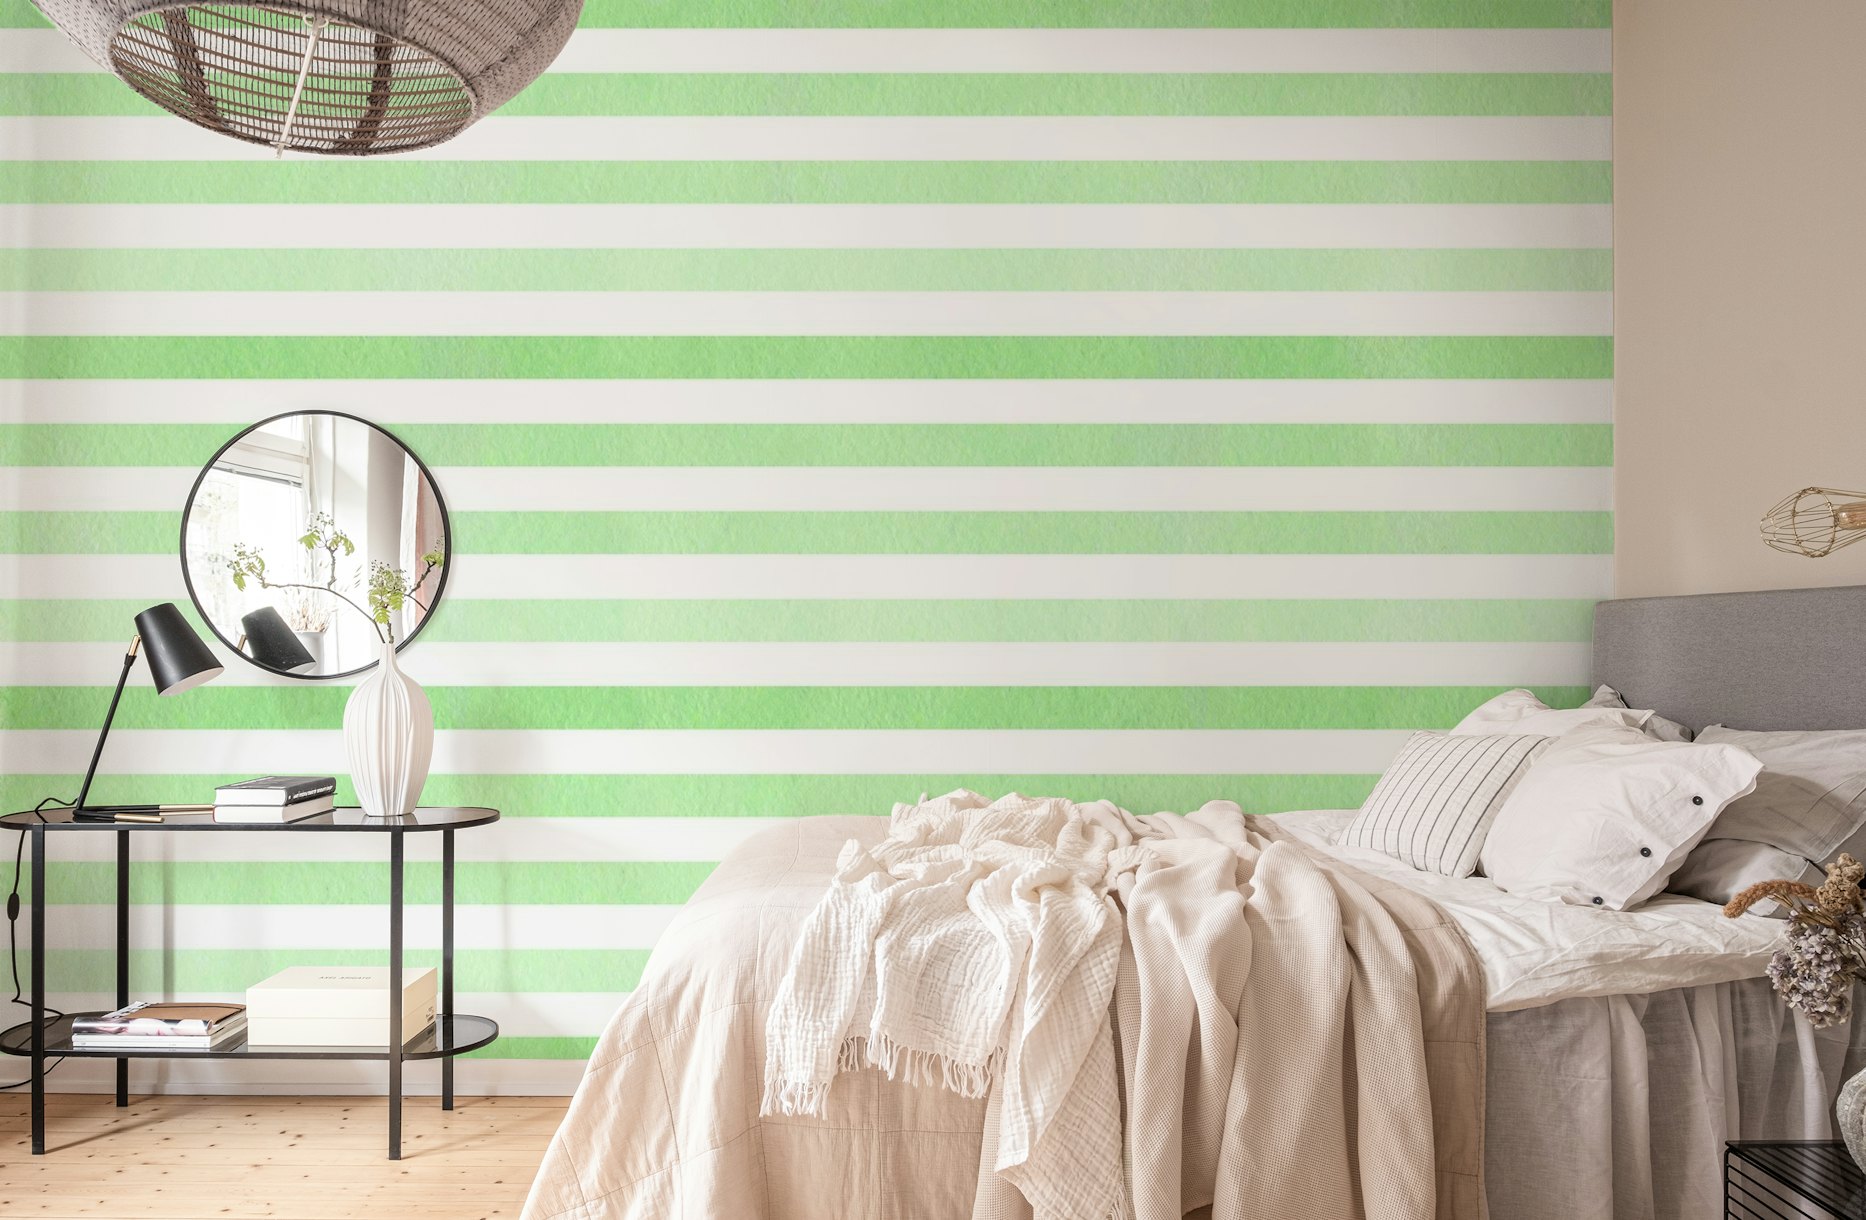 Mint Green Striped Wallpaper - Buy Online at Happywall